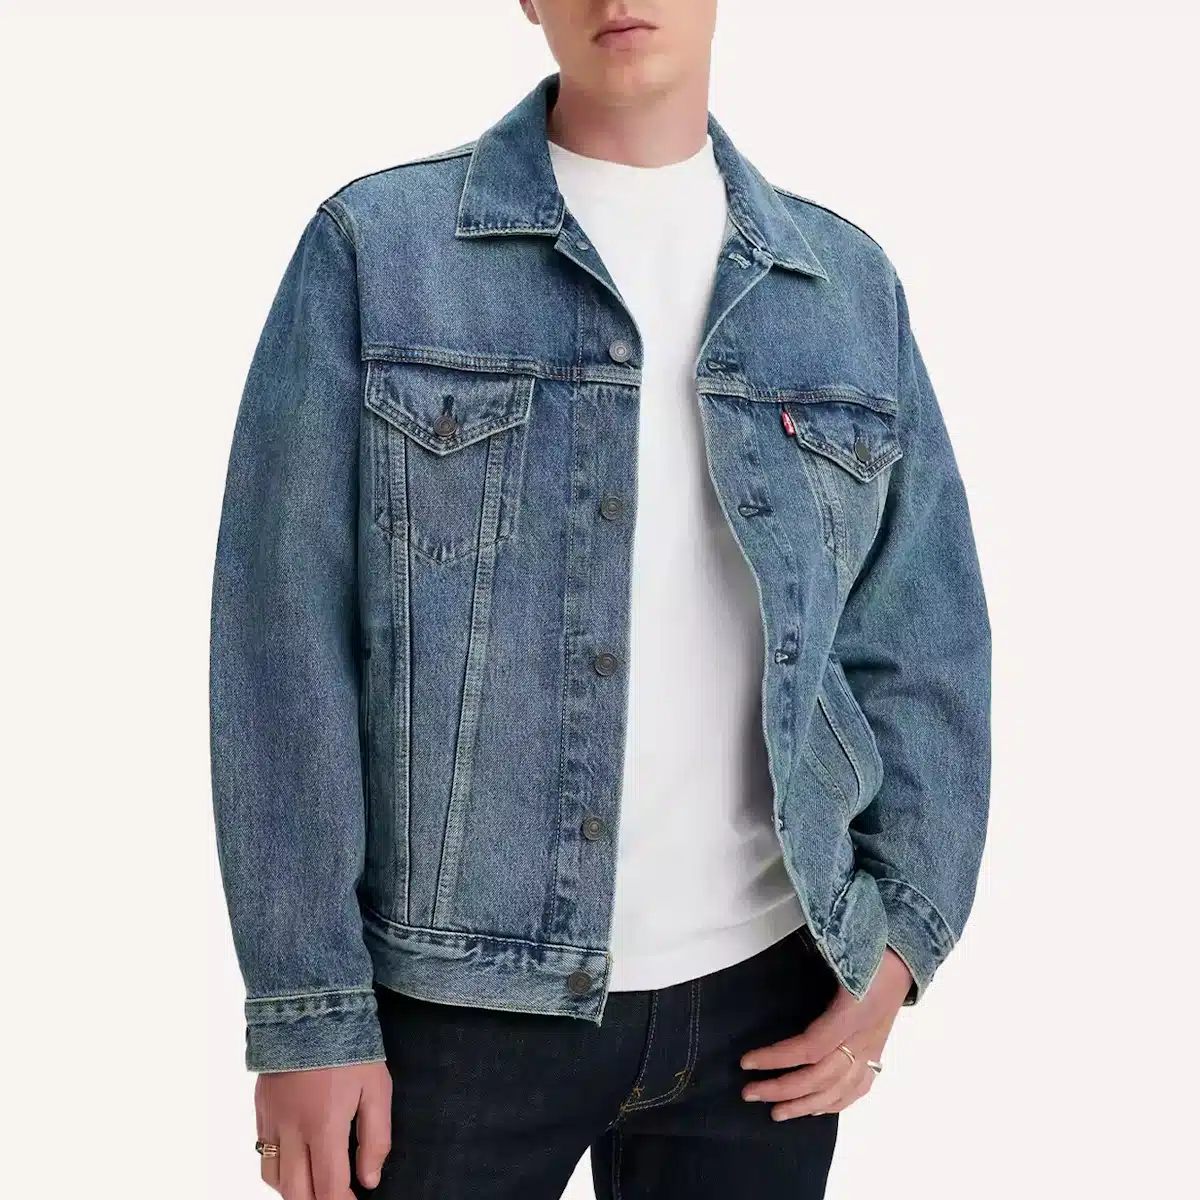 Levis Vintage Relaxed Fit Trucker Jacket